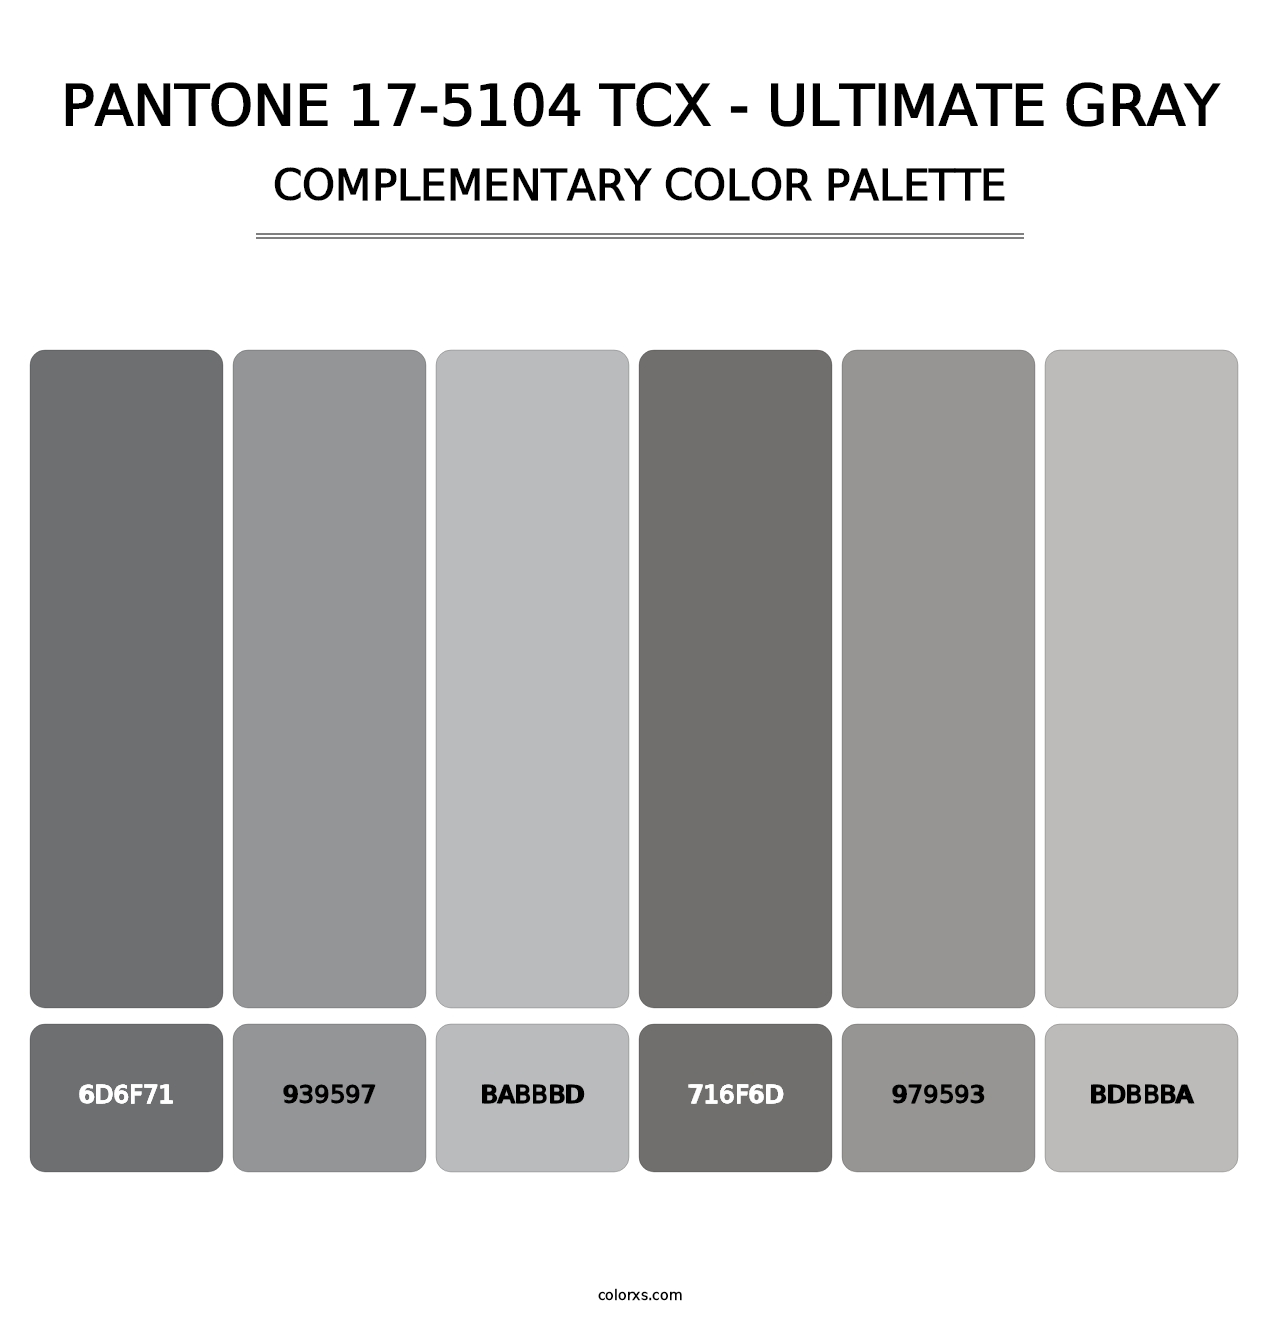 PANTONE 17-5104 TCX - Ultimate Gray - Complementary Color Palette